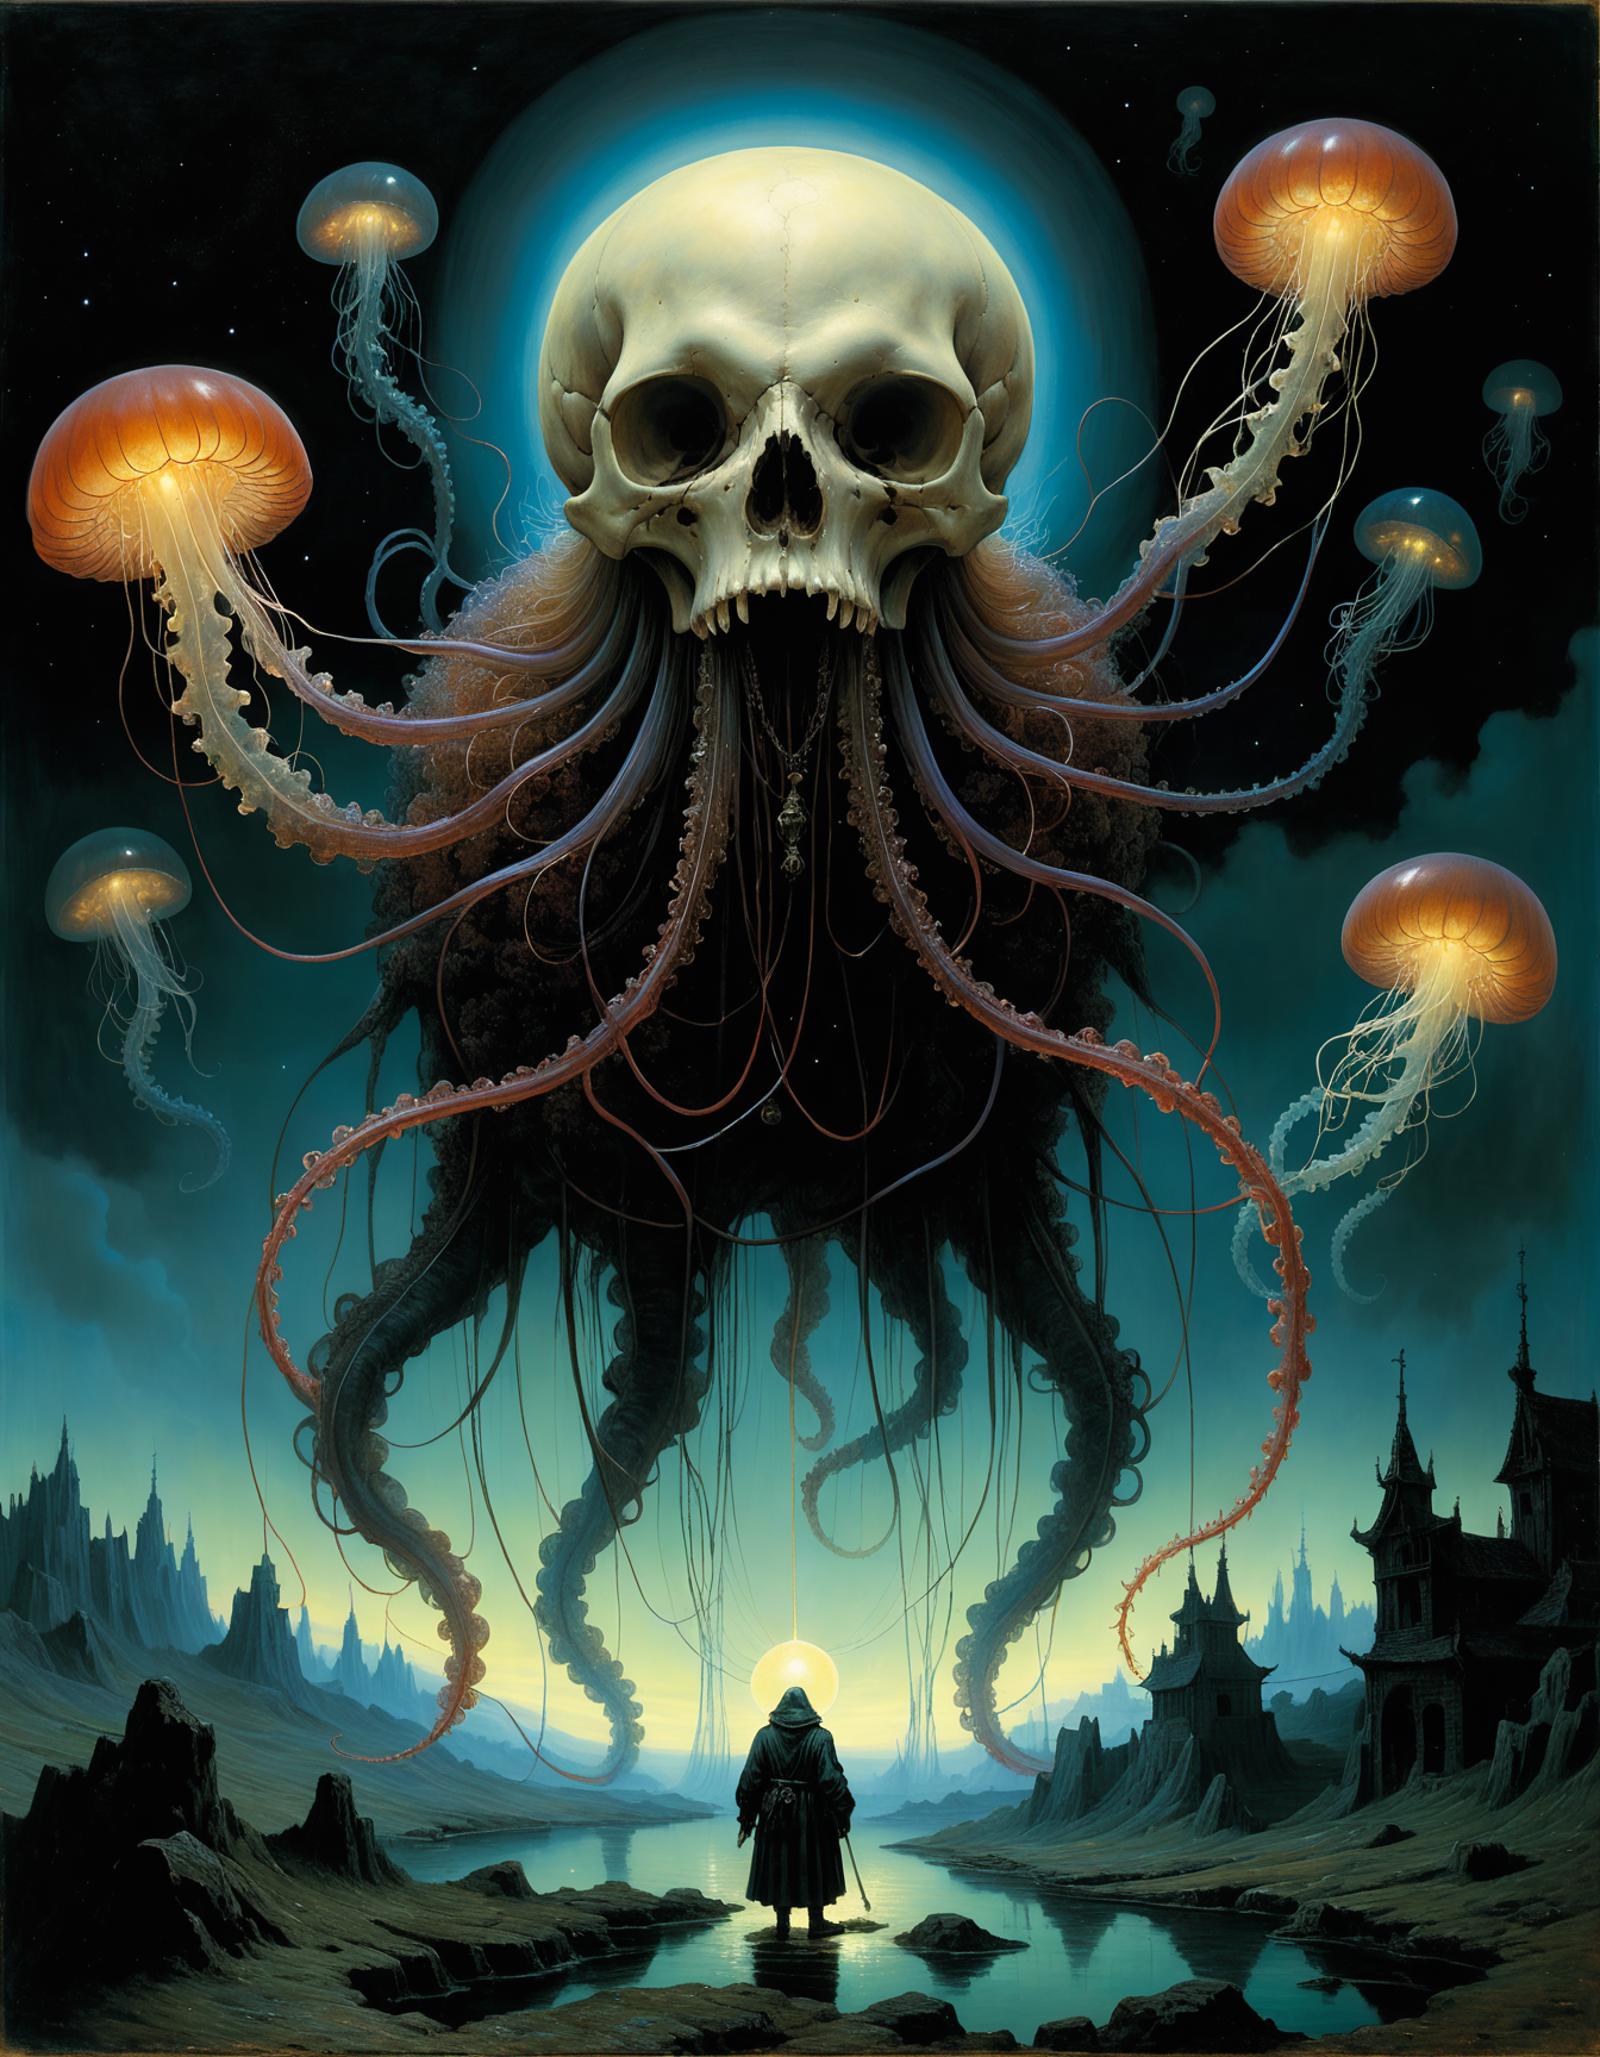 A surreal artwork of a skeleton-like creature with many tentacles, surrounded by jellyfish and other sea creatures.